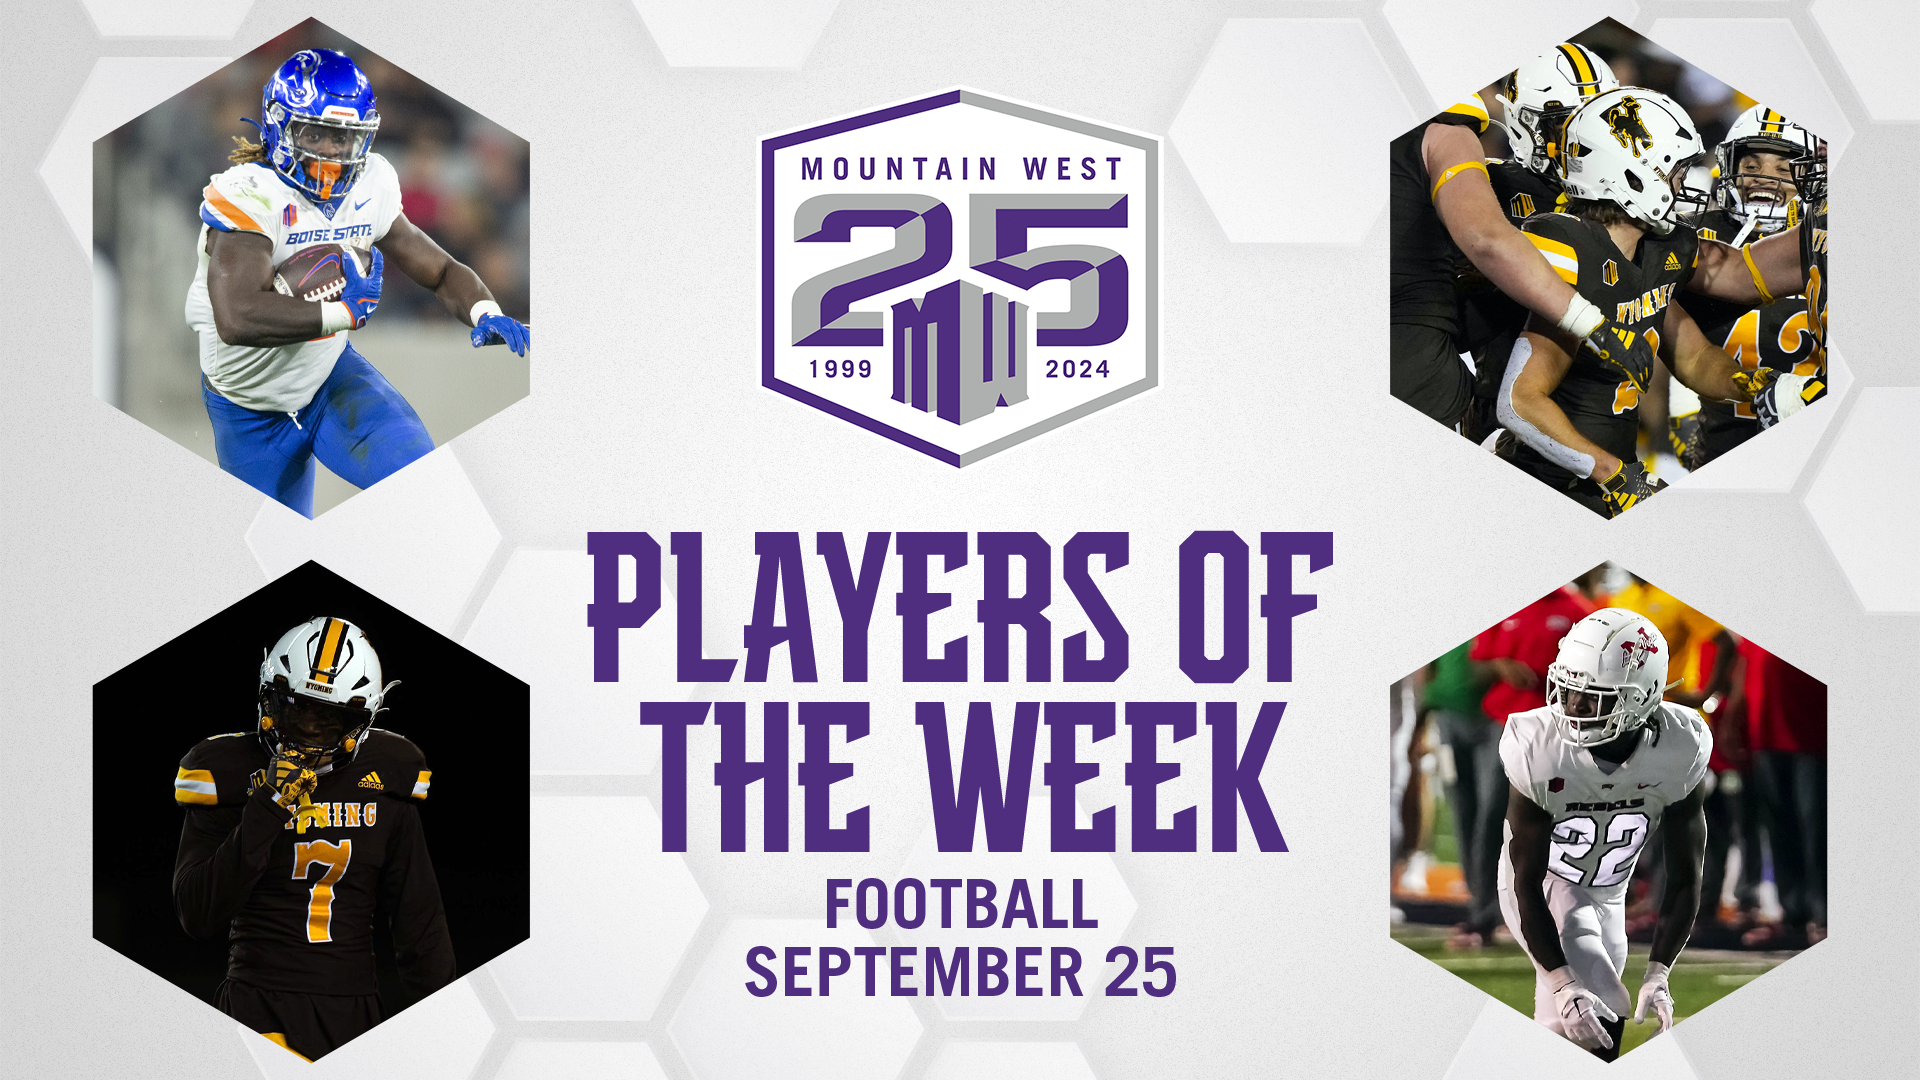 MW Football Players of the Week - September 25